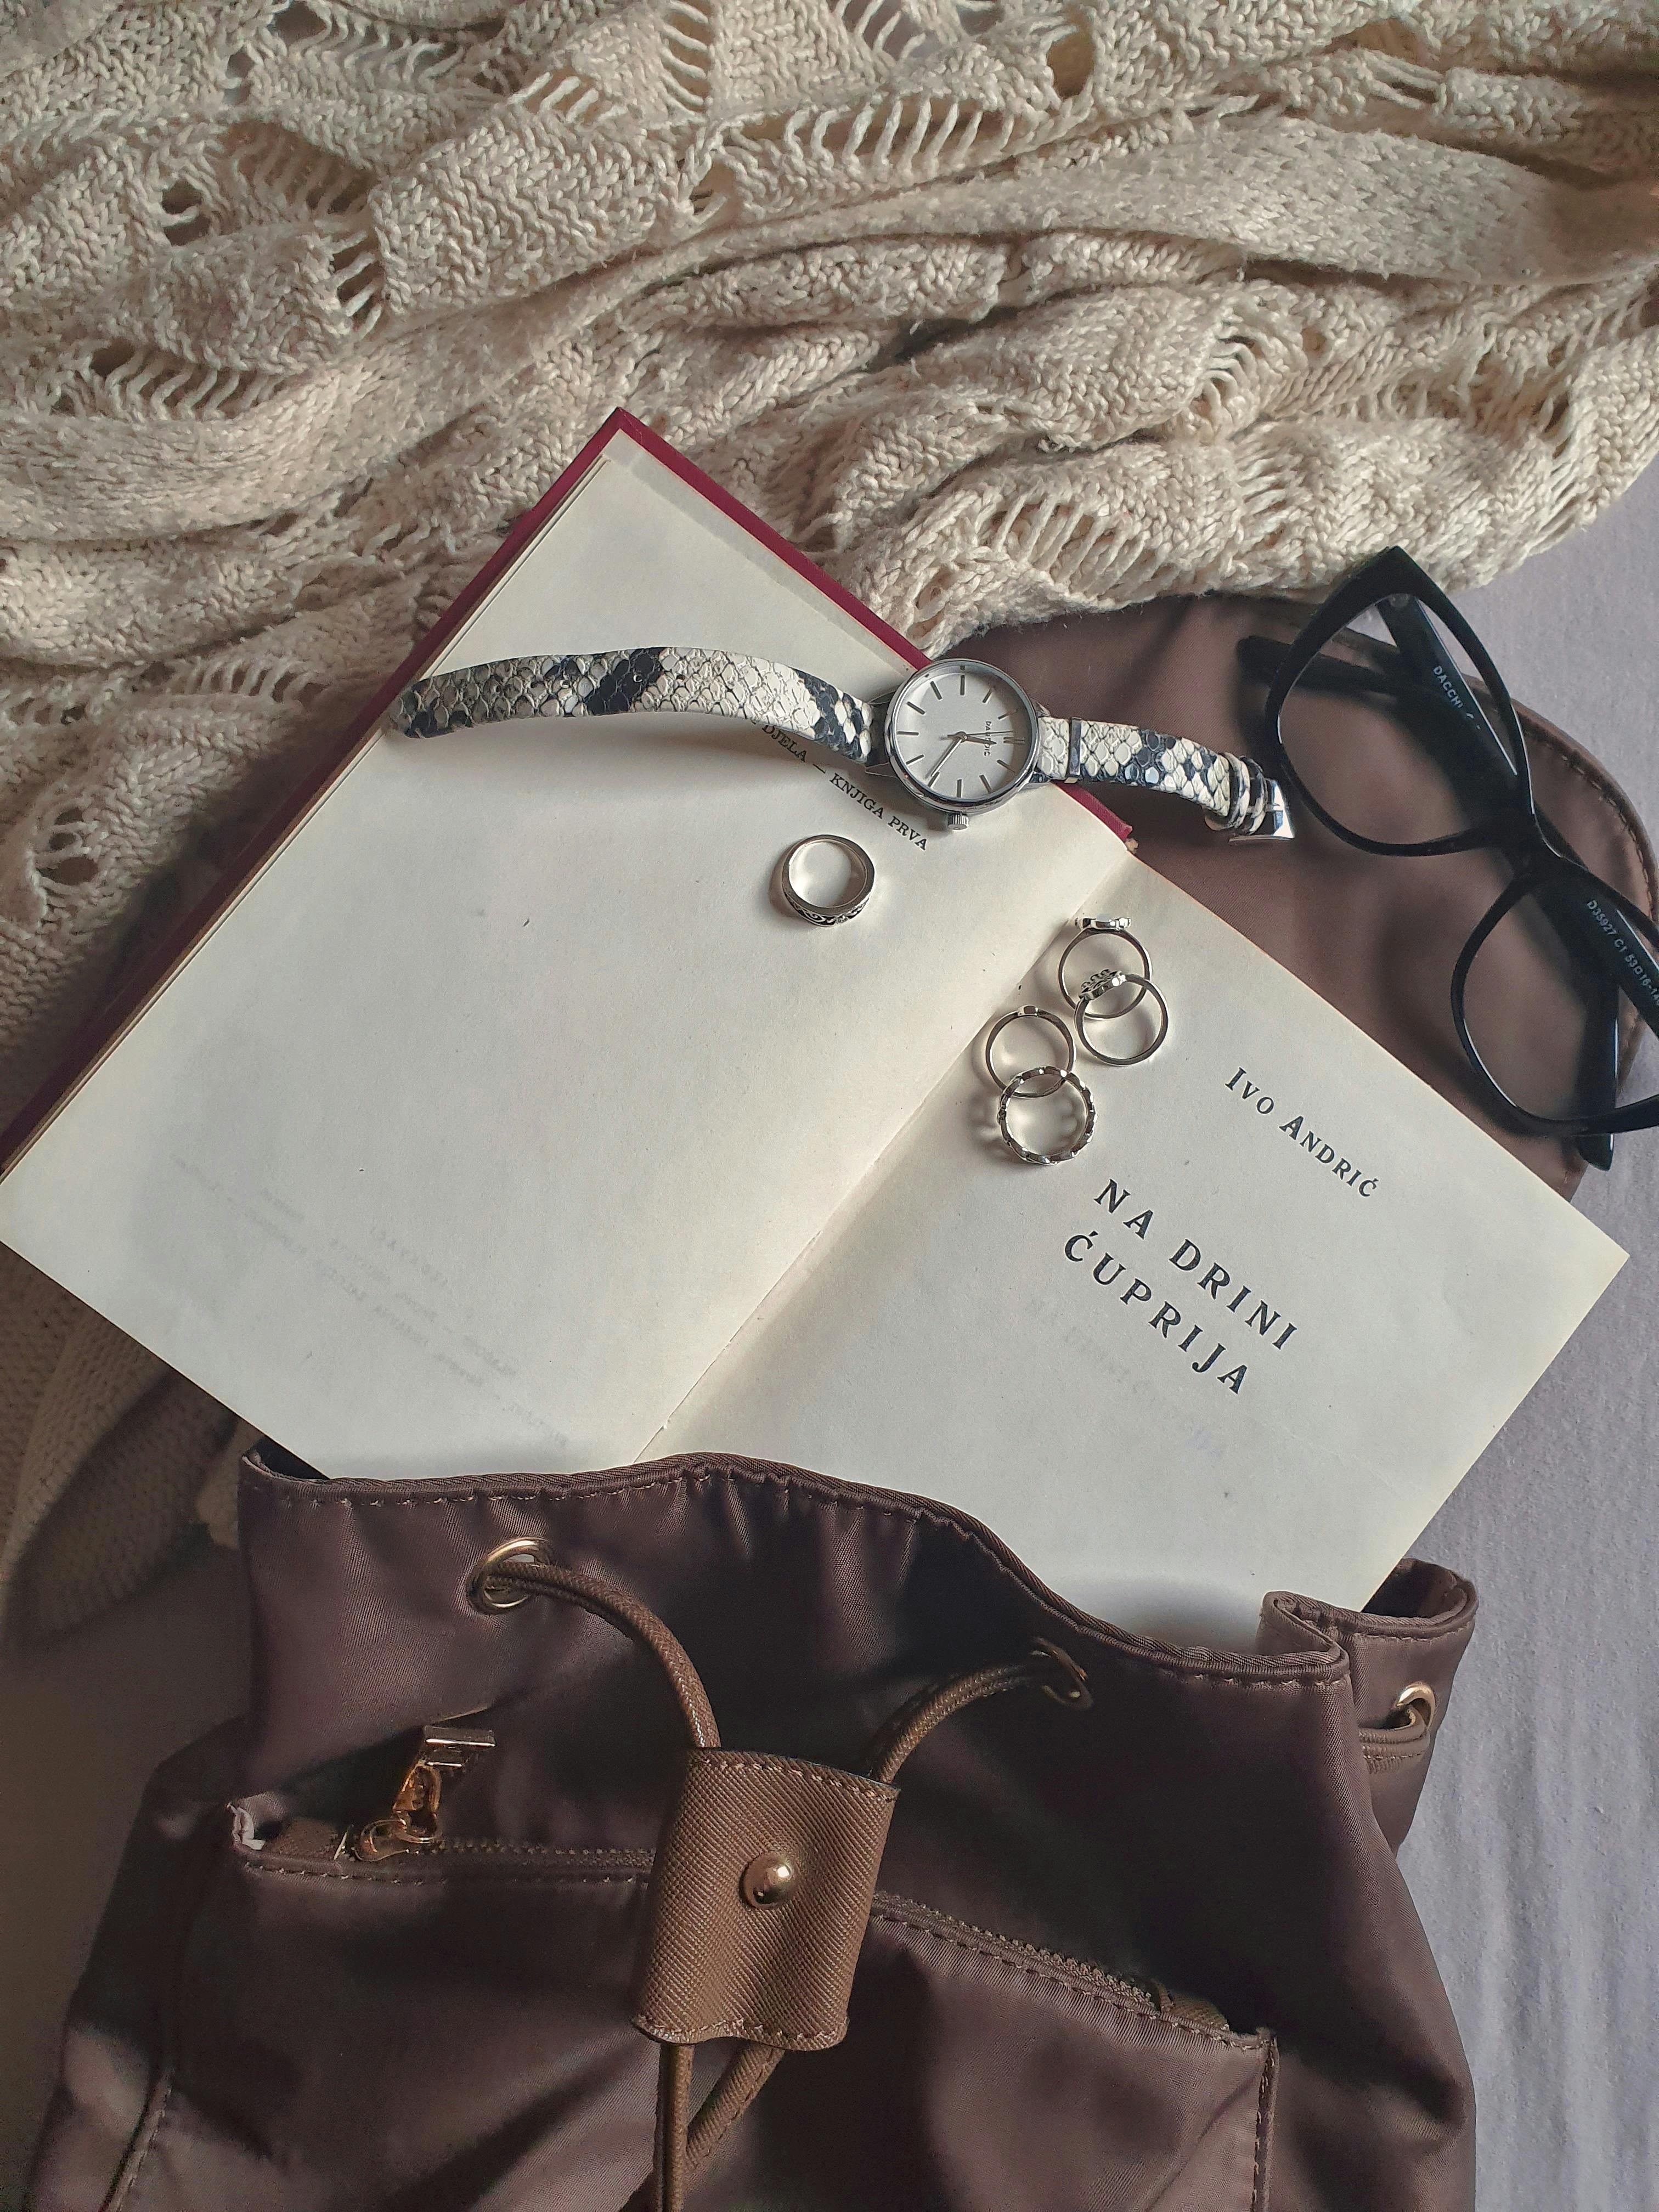 Jewelry and a book spilled out from a bag | Source: Pexels